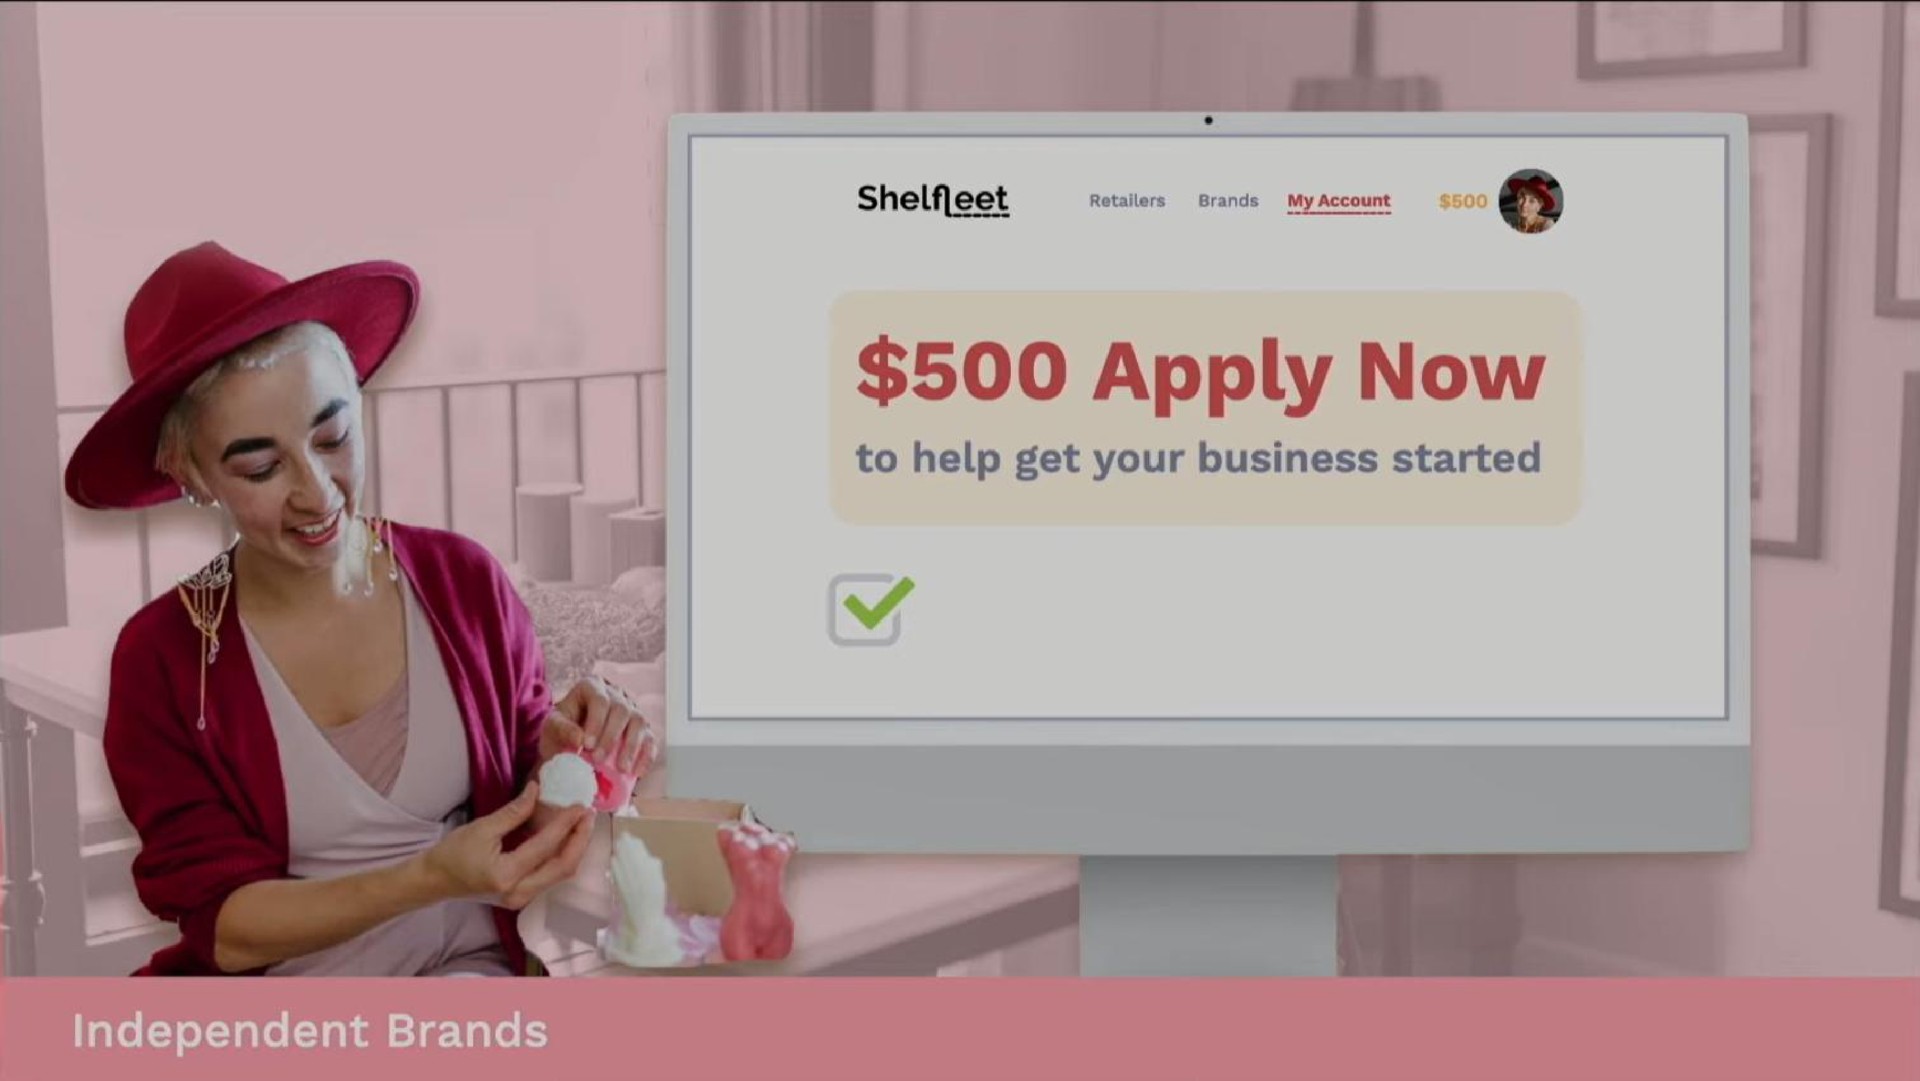 apply now to help get your business started | Shelfleet